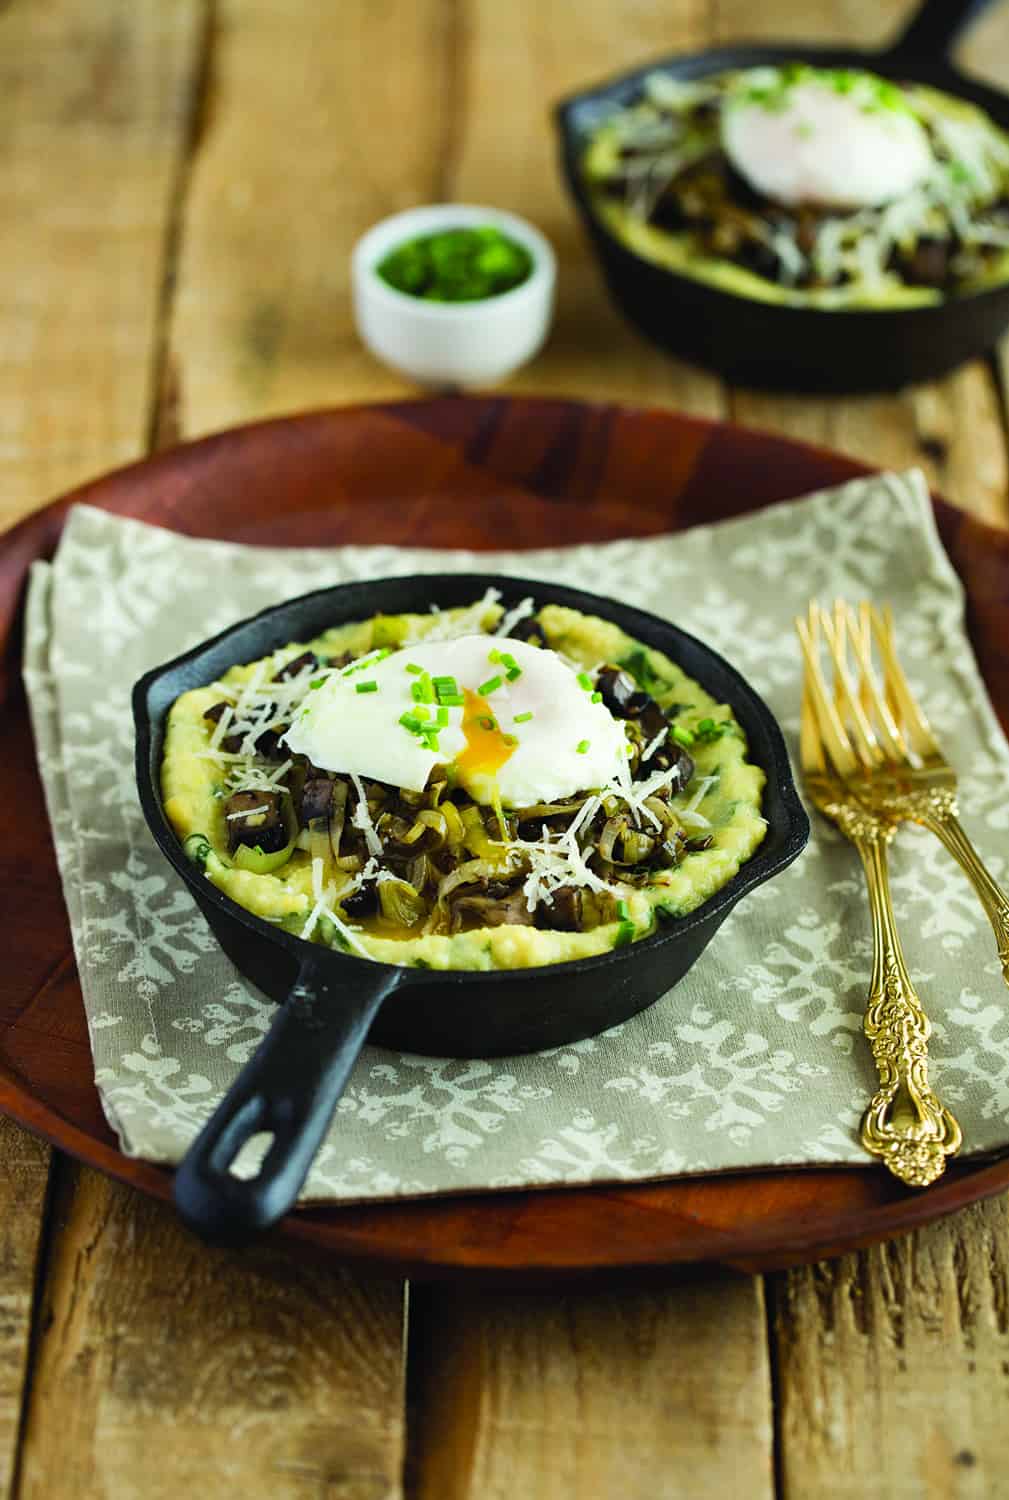 Spinach Polenta with Mushrooms, Leek, and Poached Egg